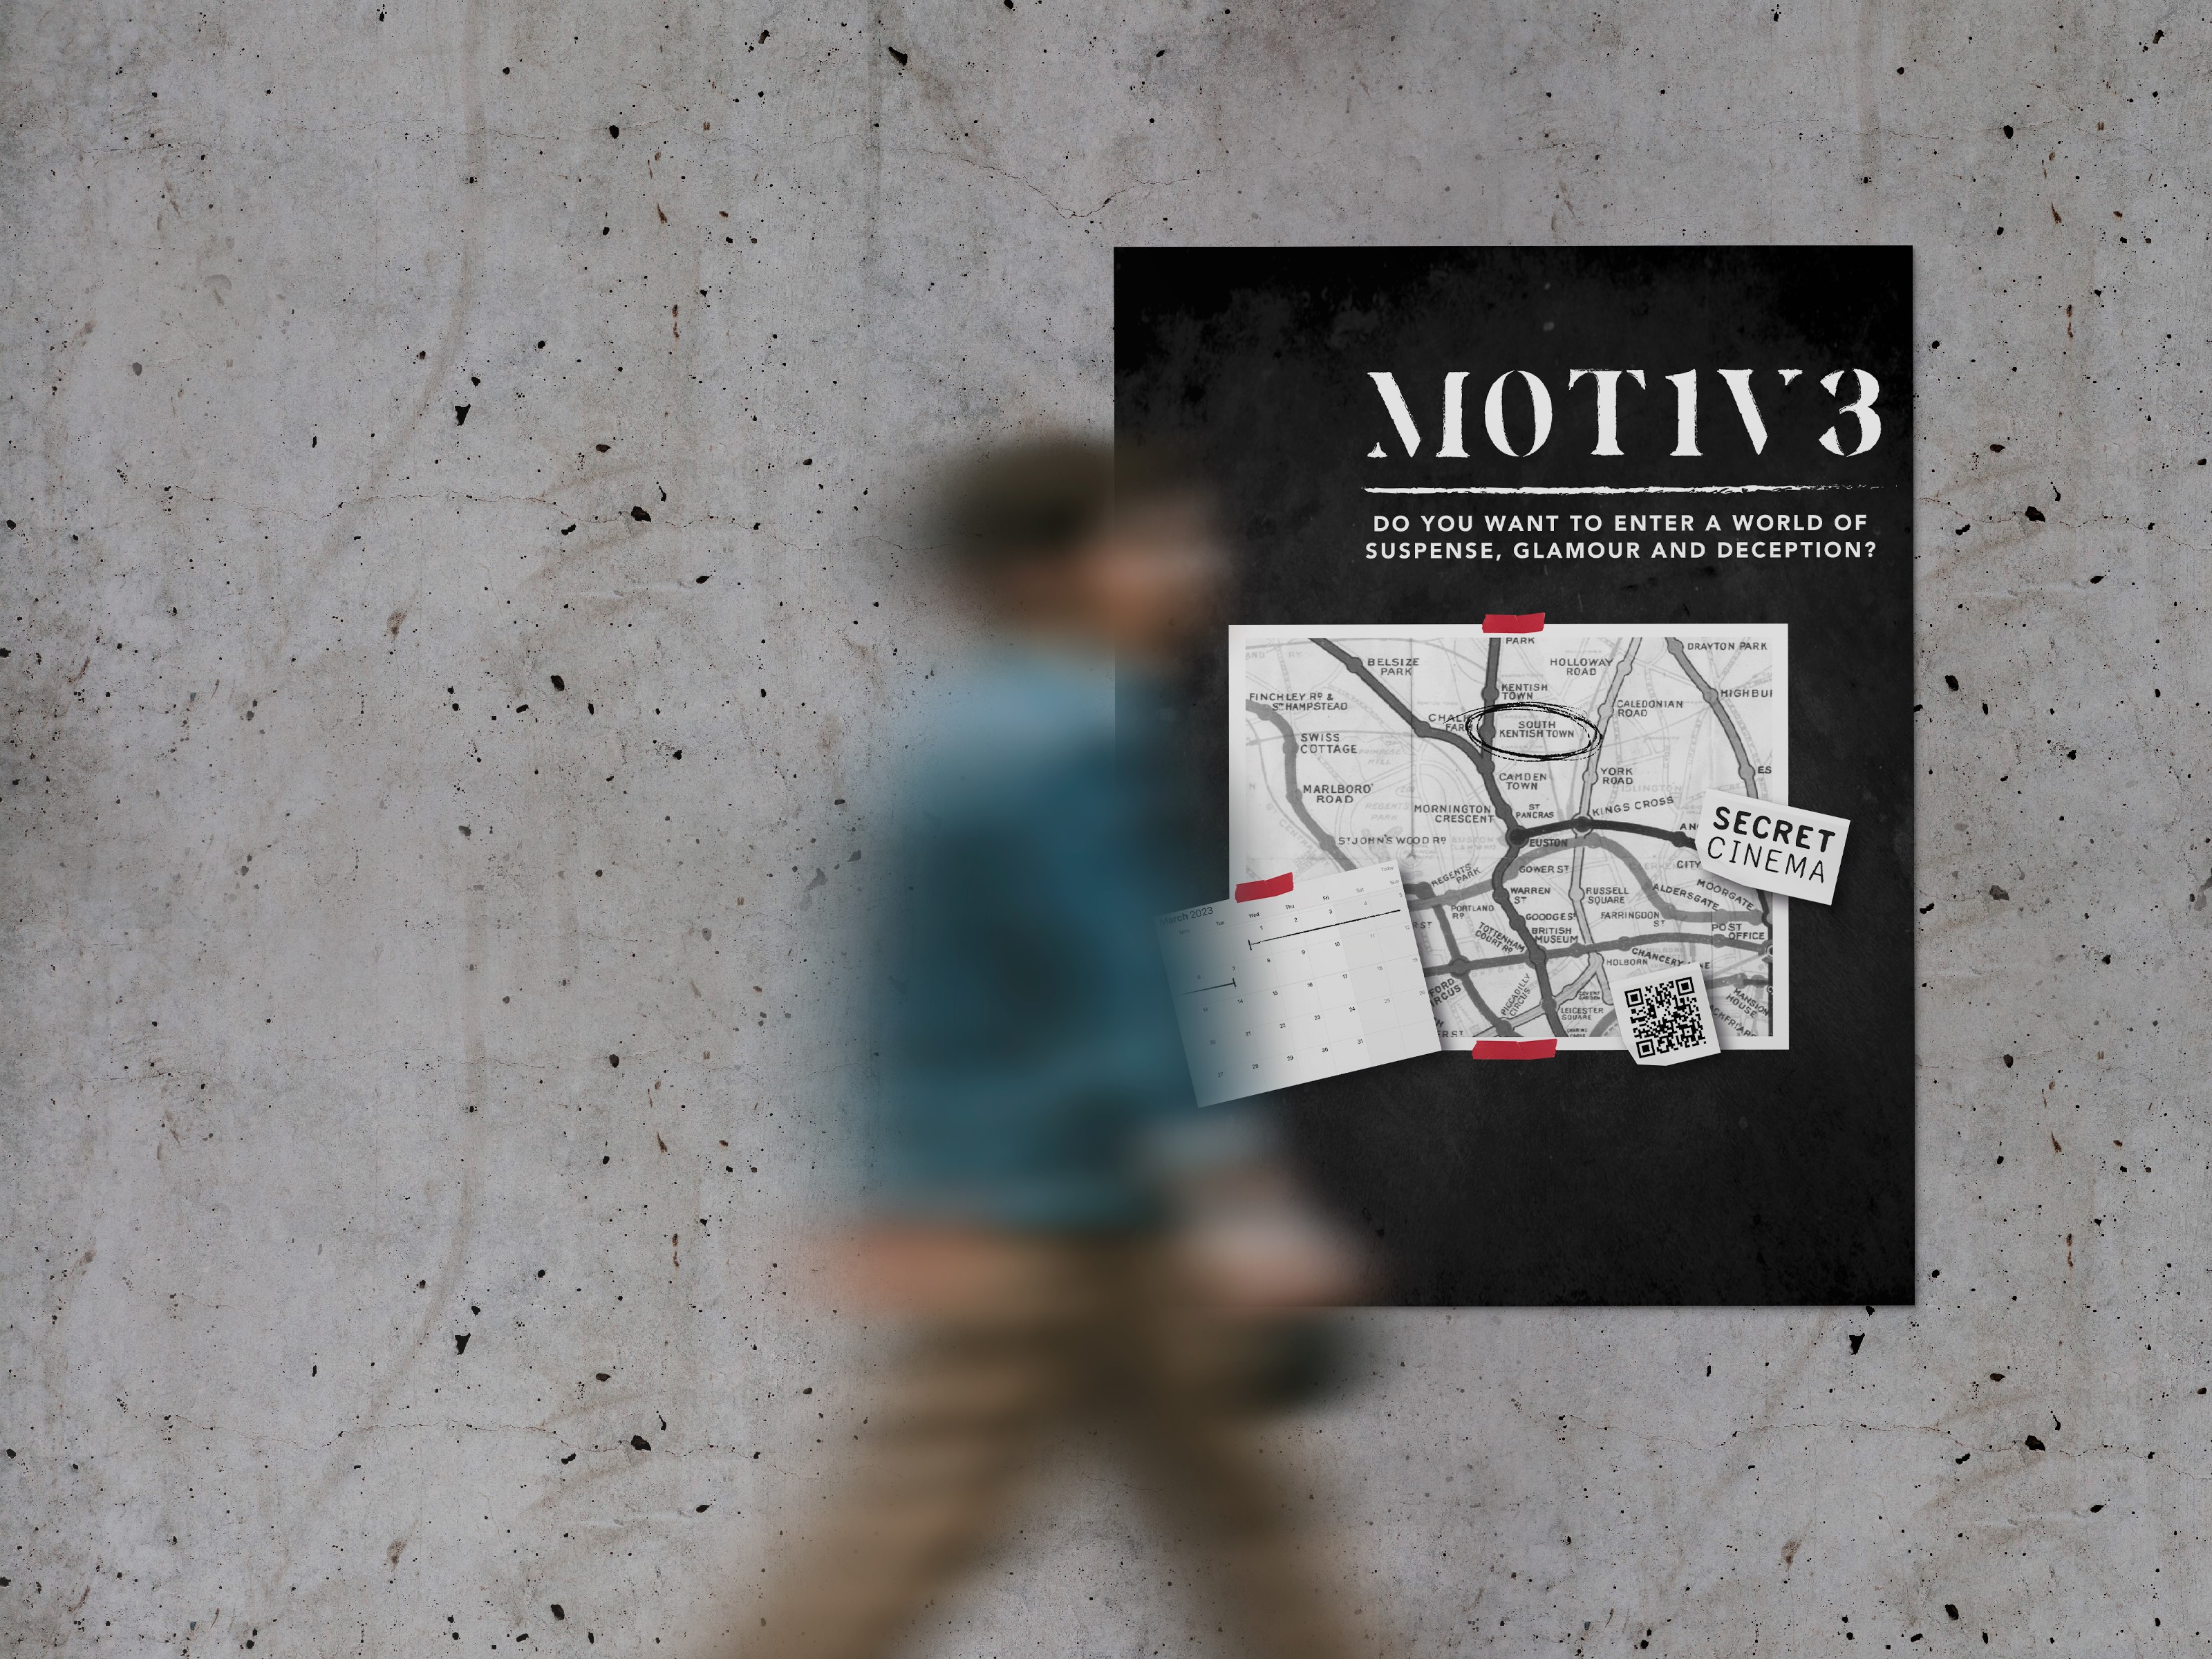 BA Graphic Communication work by Megan Maskell, showing a detective wall style promotional poster advertising the Motive film festival.